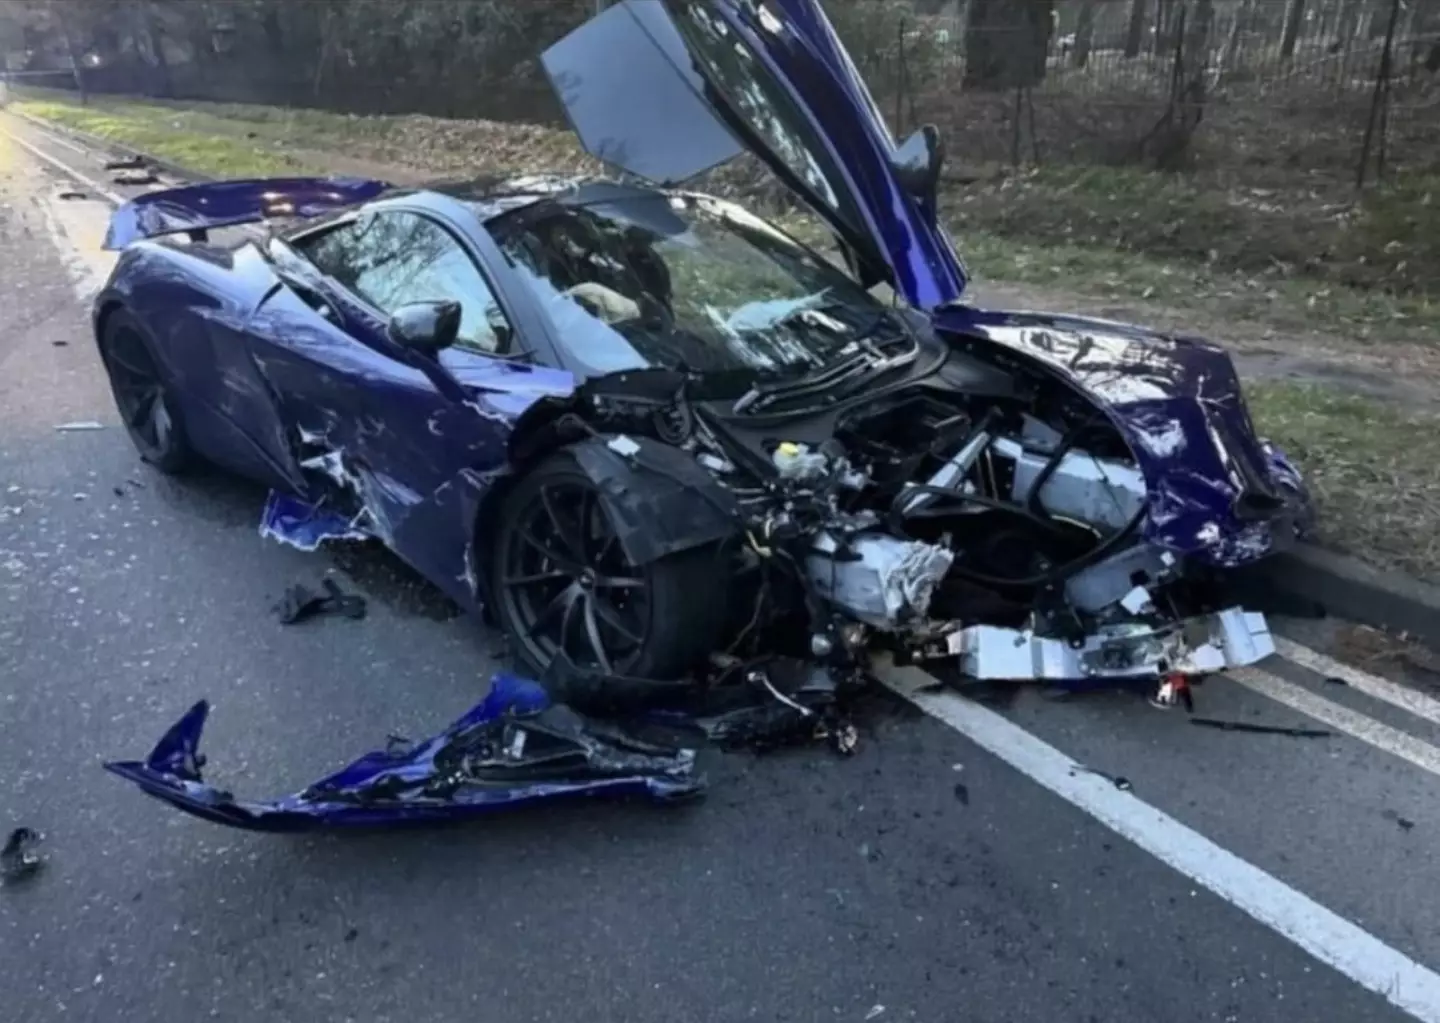 Footage of the McLaren car crash has been shared on social media.